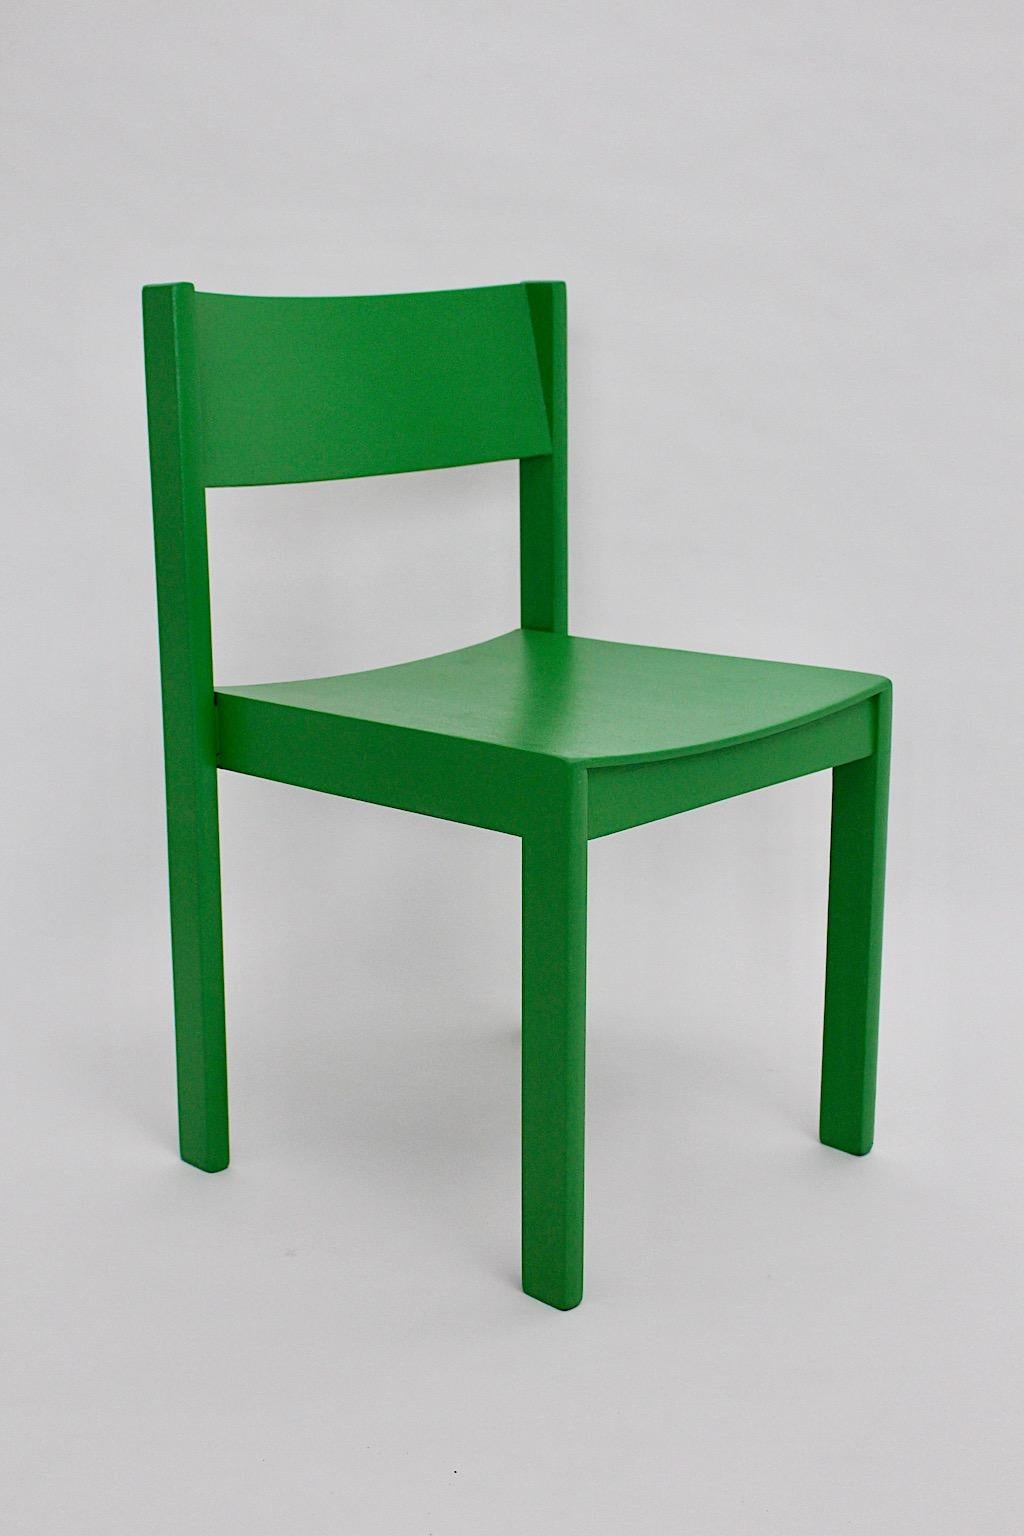 Lacquered Mid Century Modern Green Four Dining Room Chairs or Chairs 1950s Austria For Sale